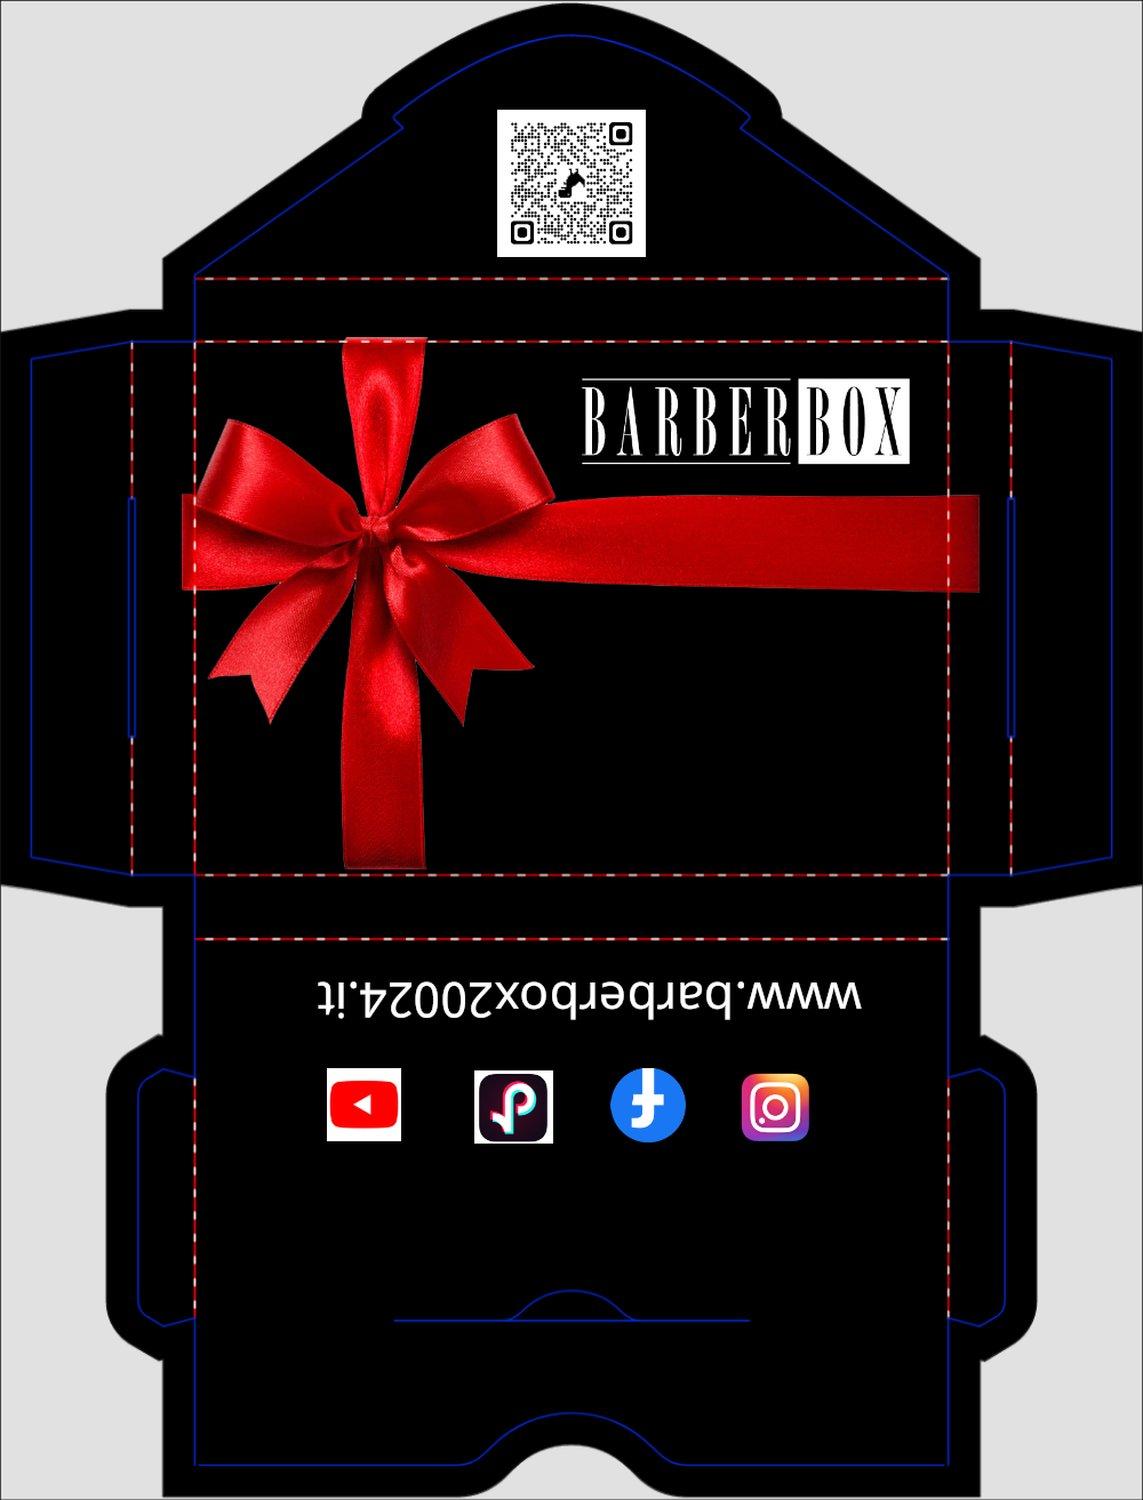 Barberbox | Gift Card Luxury Experience